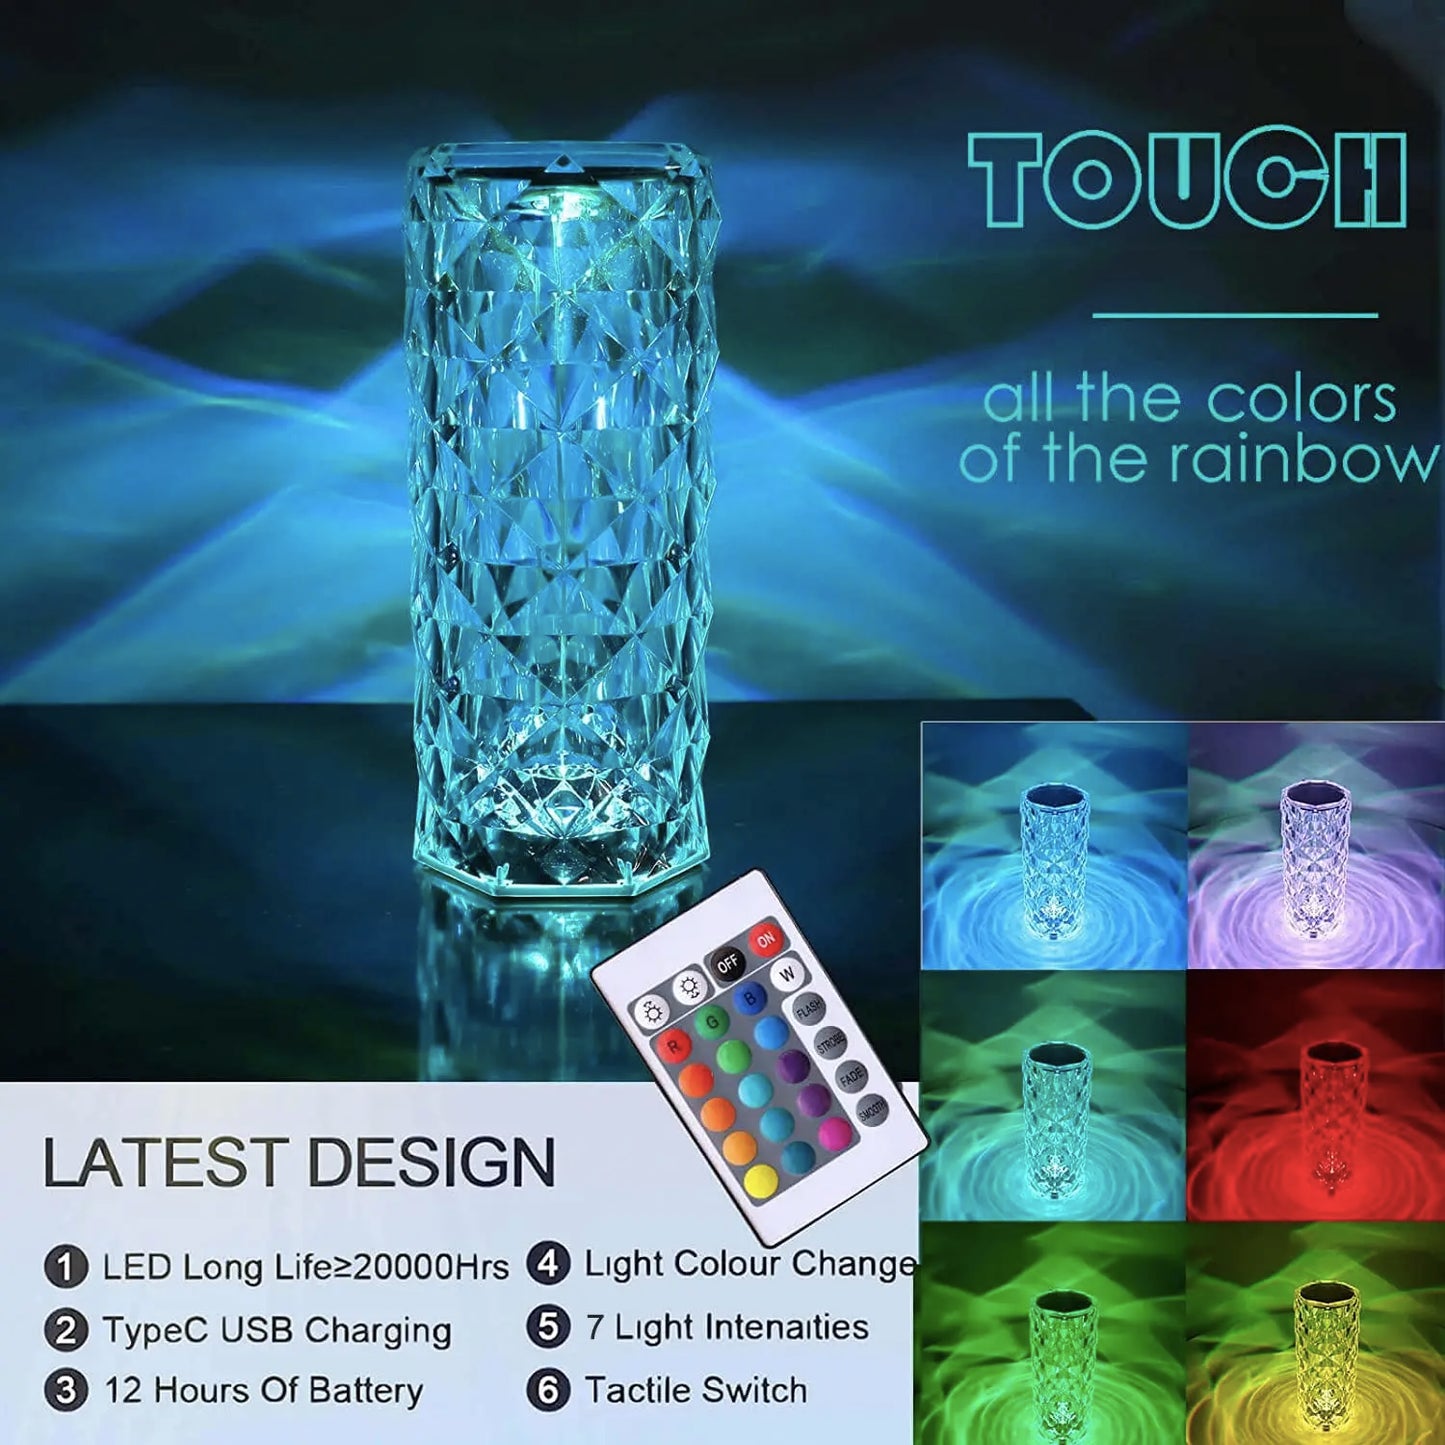 Rechargeable RGB Rose LED Night Light: Stunning Color Changing Crystal Touch Lamp - Perfect for Bedroom, Nightstand, & Christmas Decor!